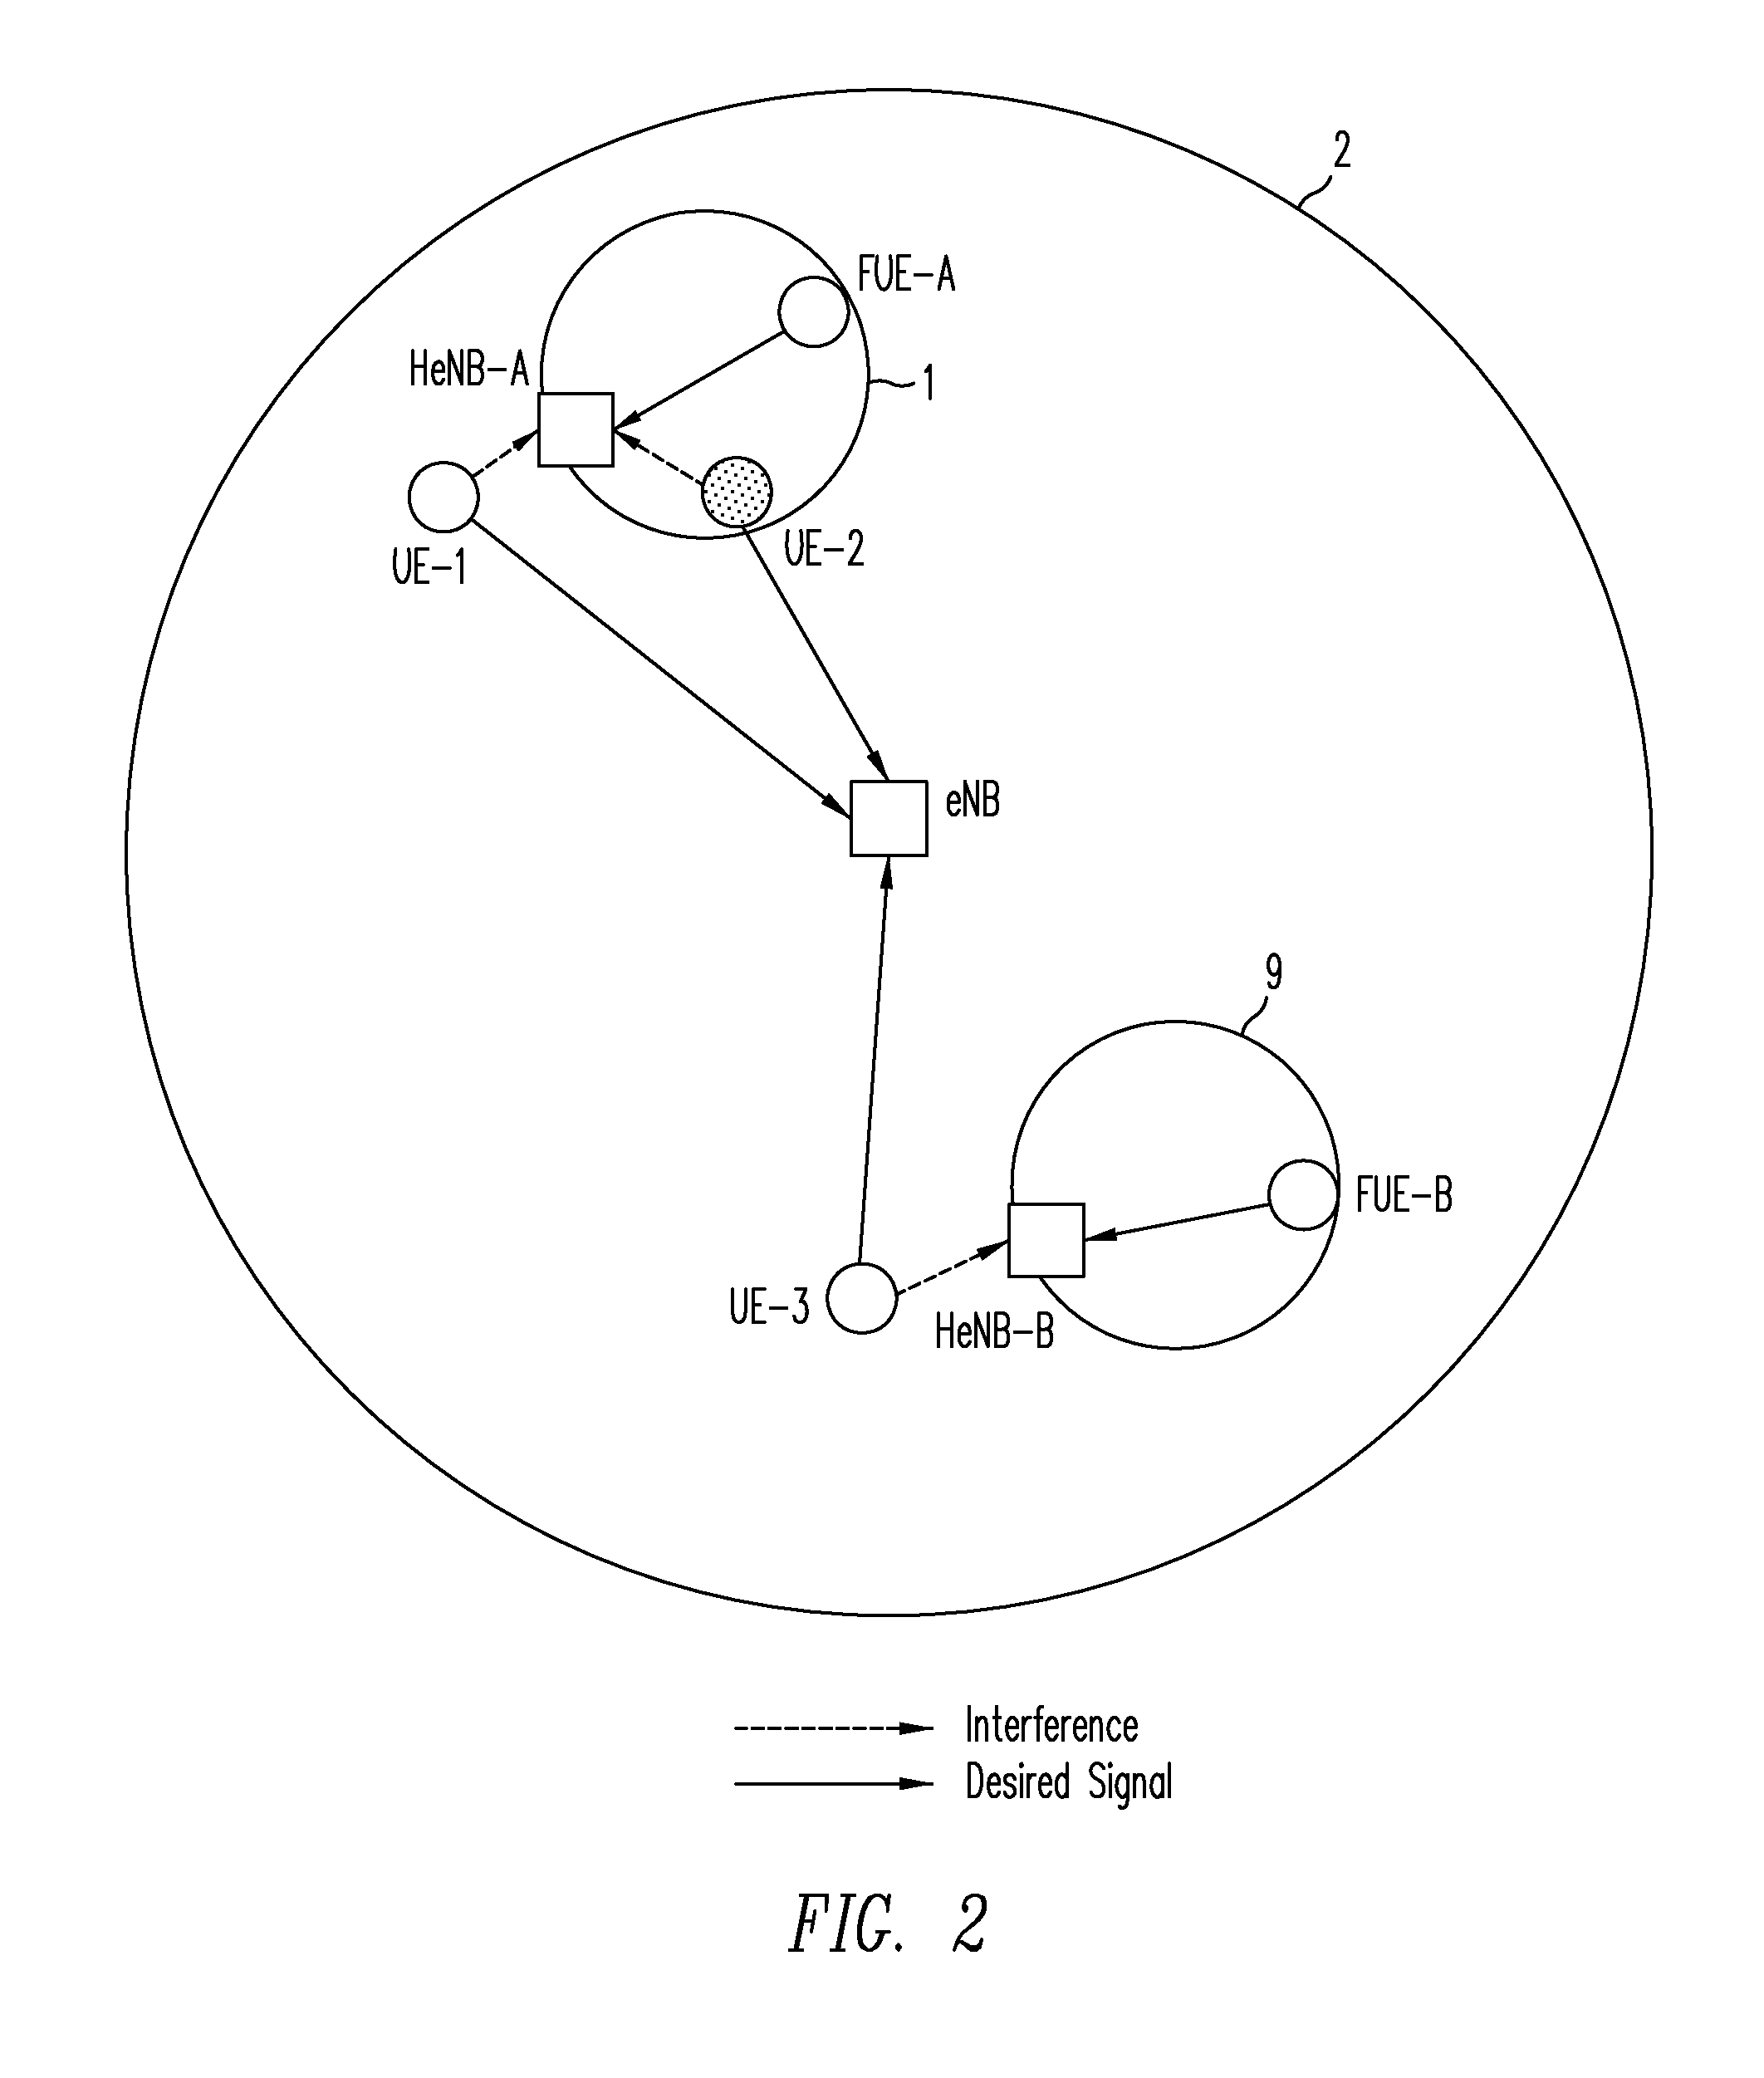 System and method for inter-cell interference avoidance in co-channel networks